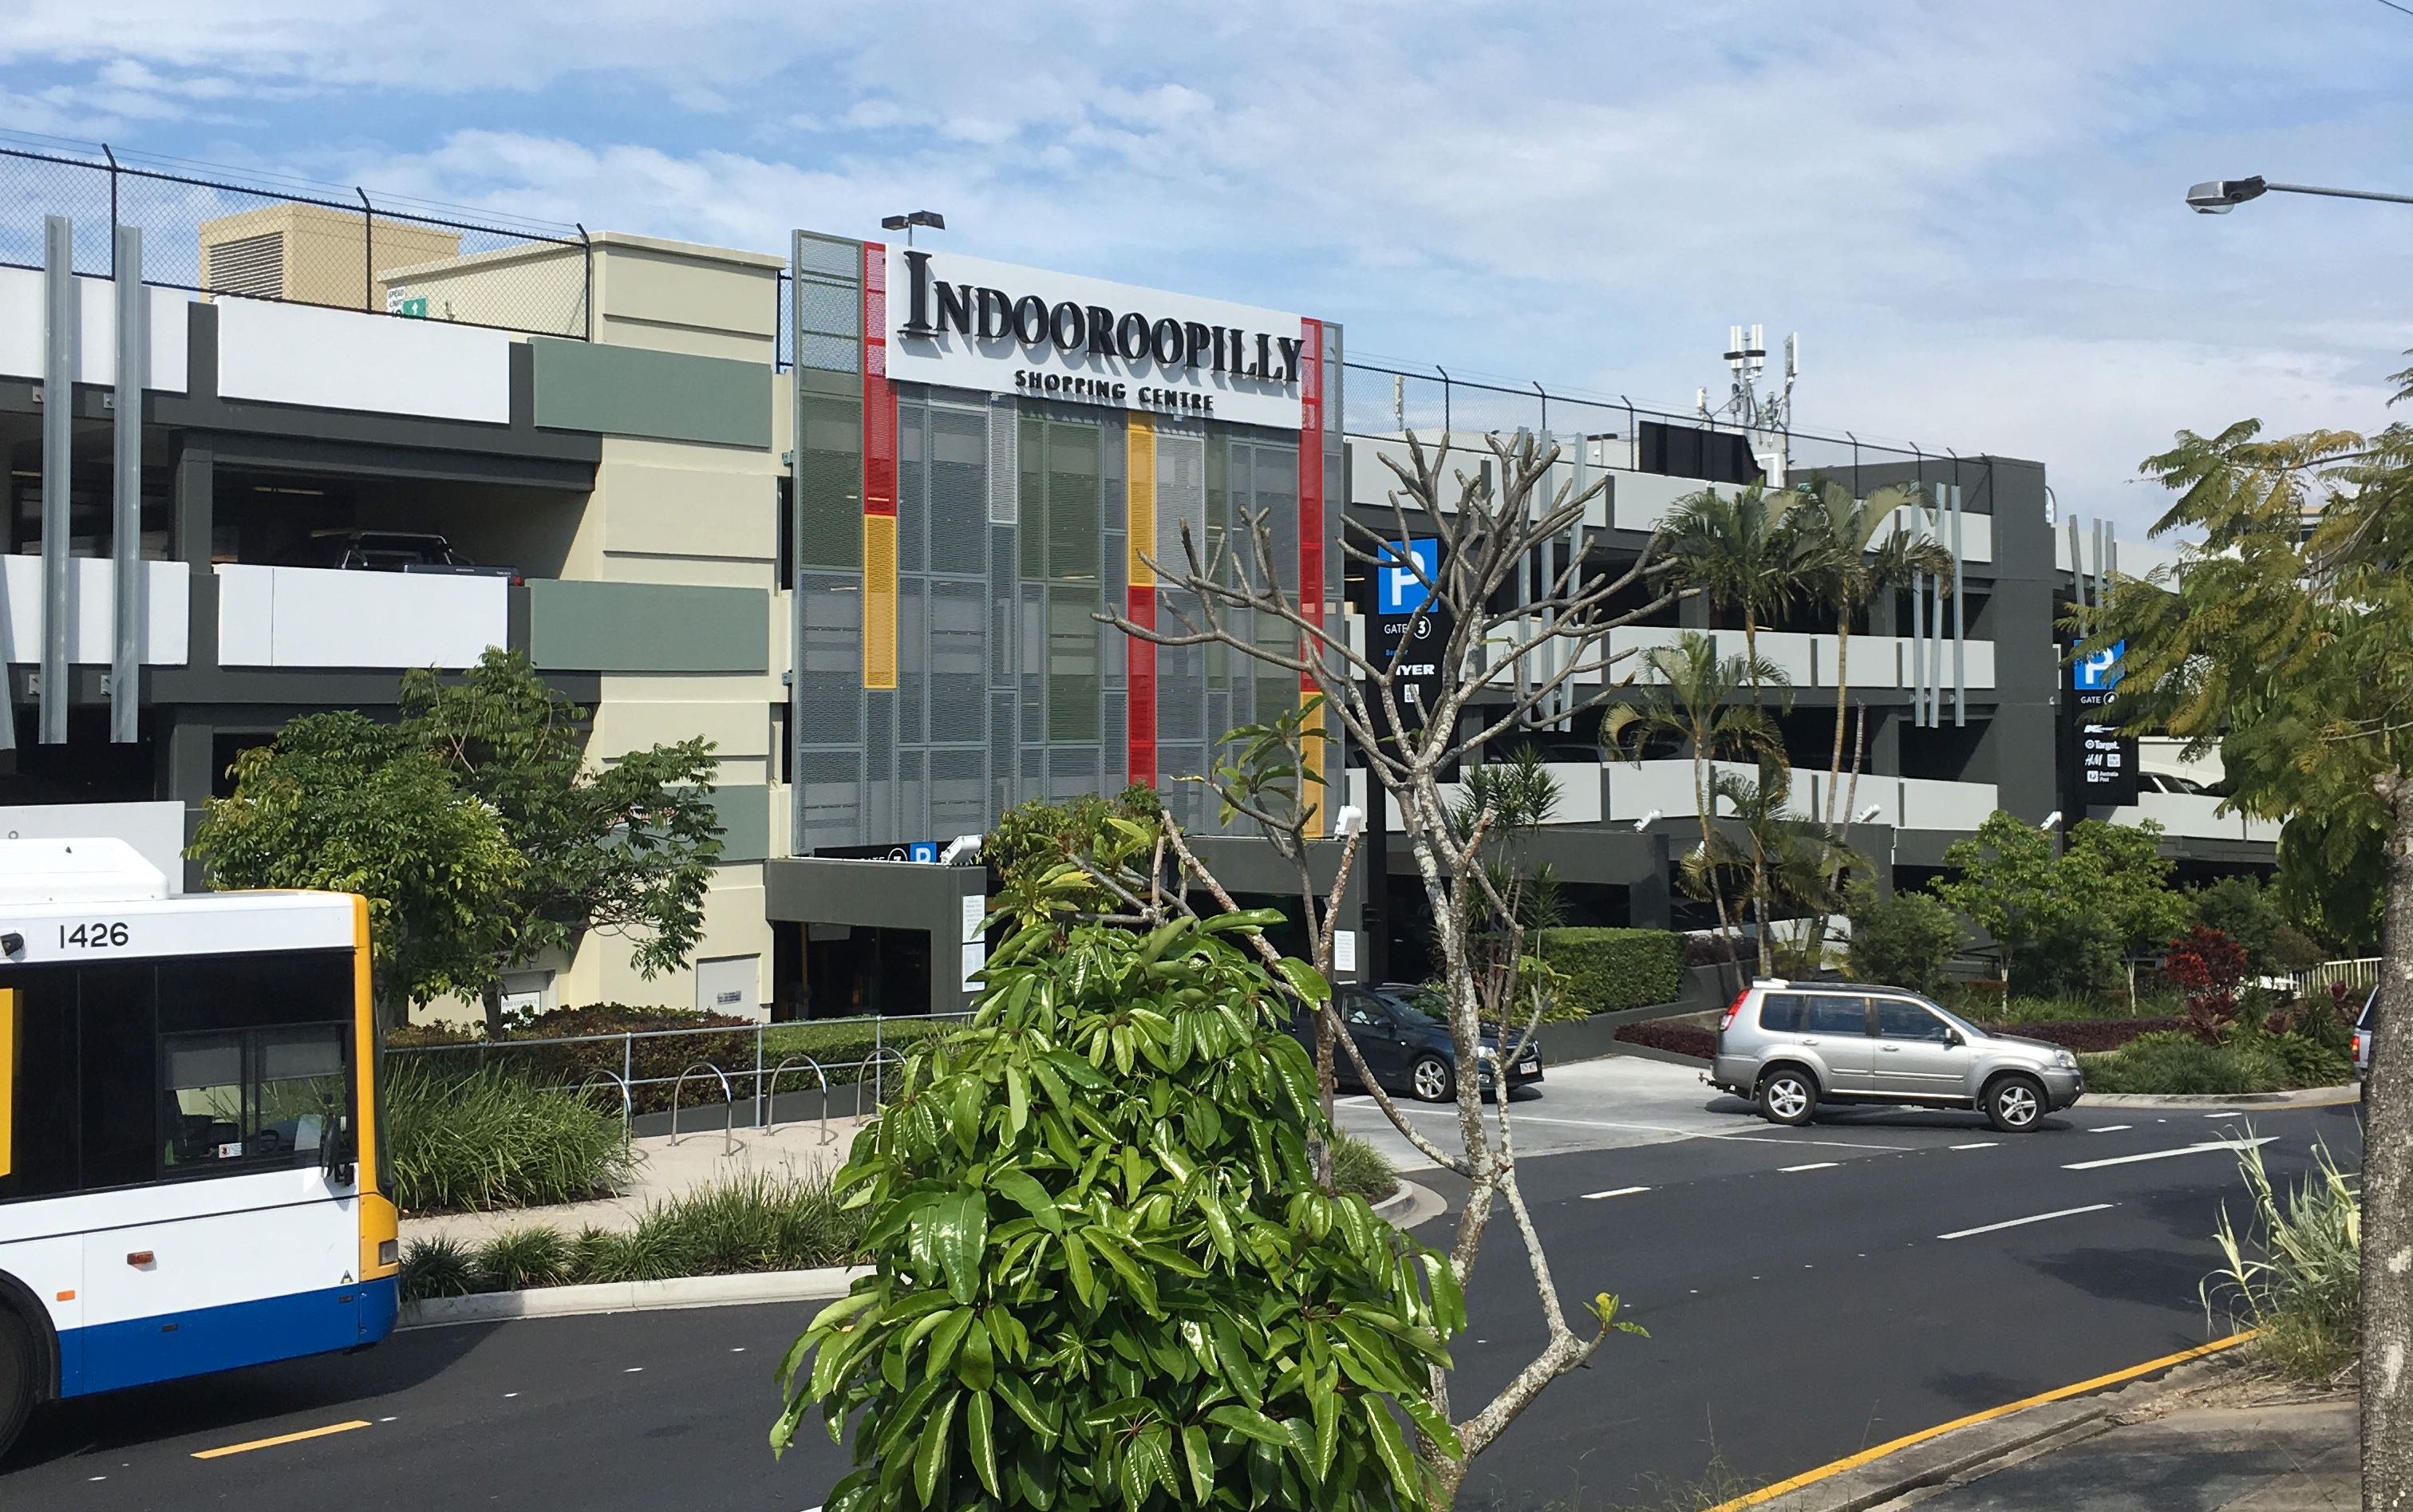 Indooroopilly Shopping Centre also serves as a major bus interchange for the area. 